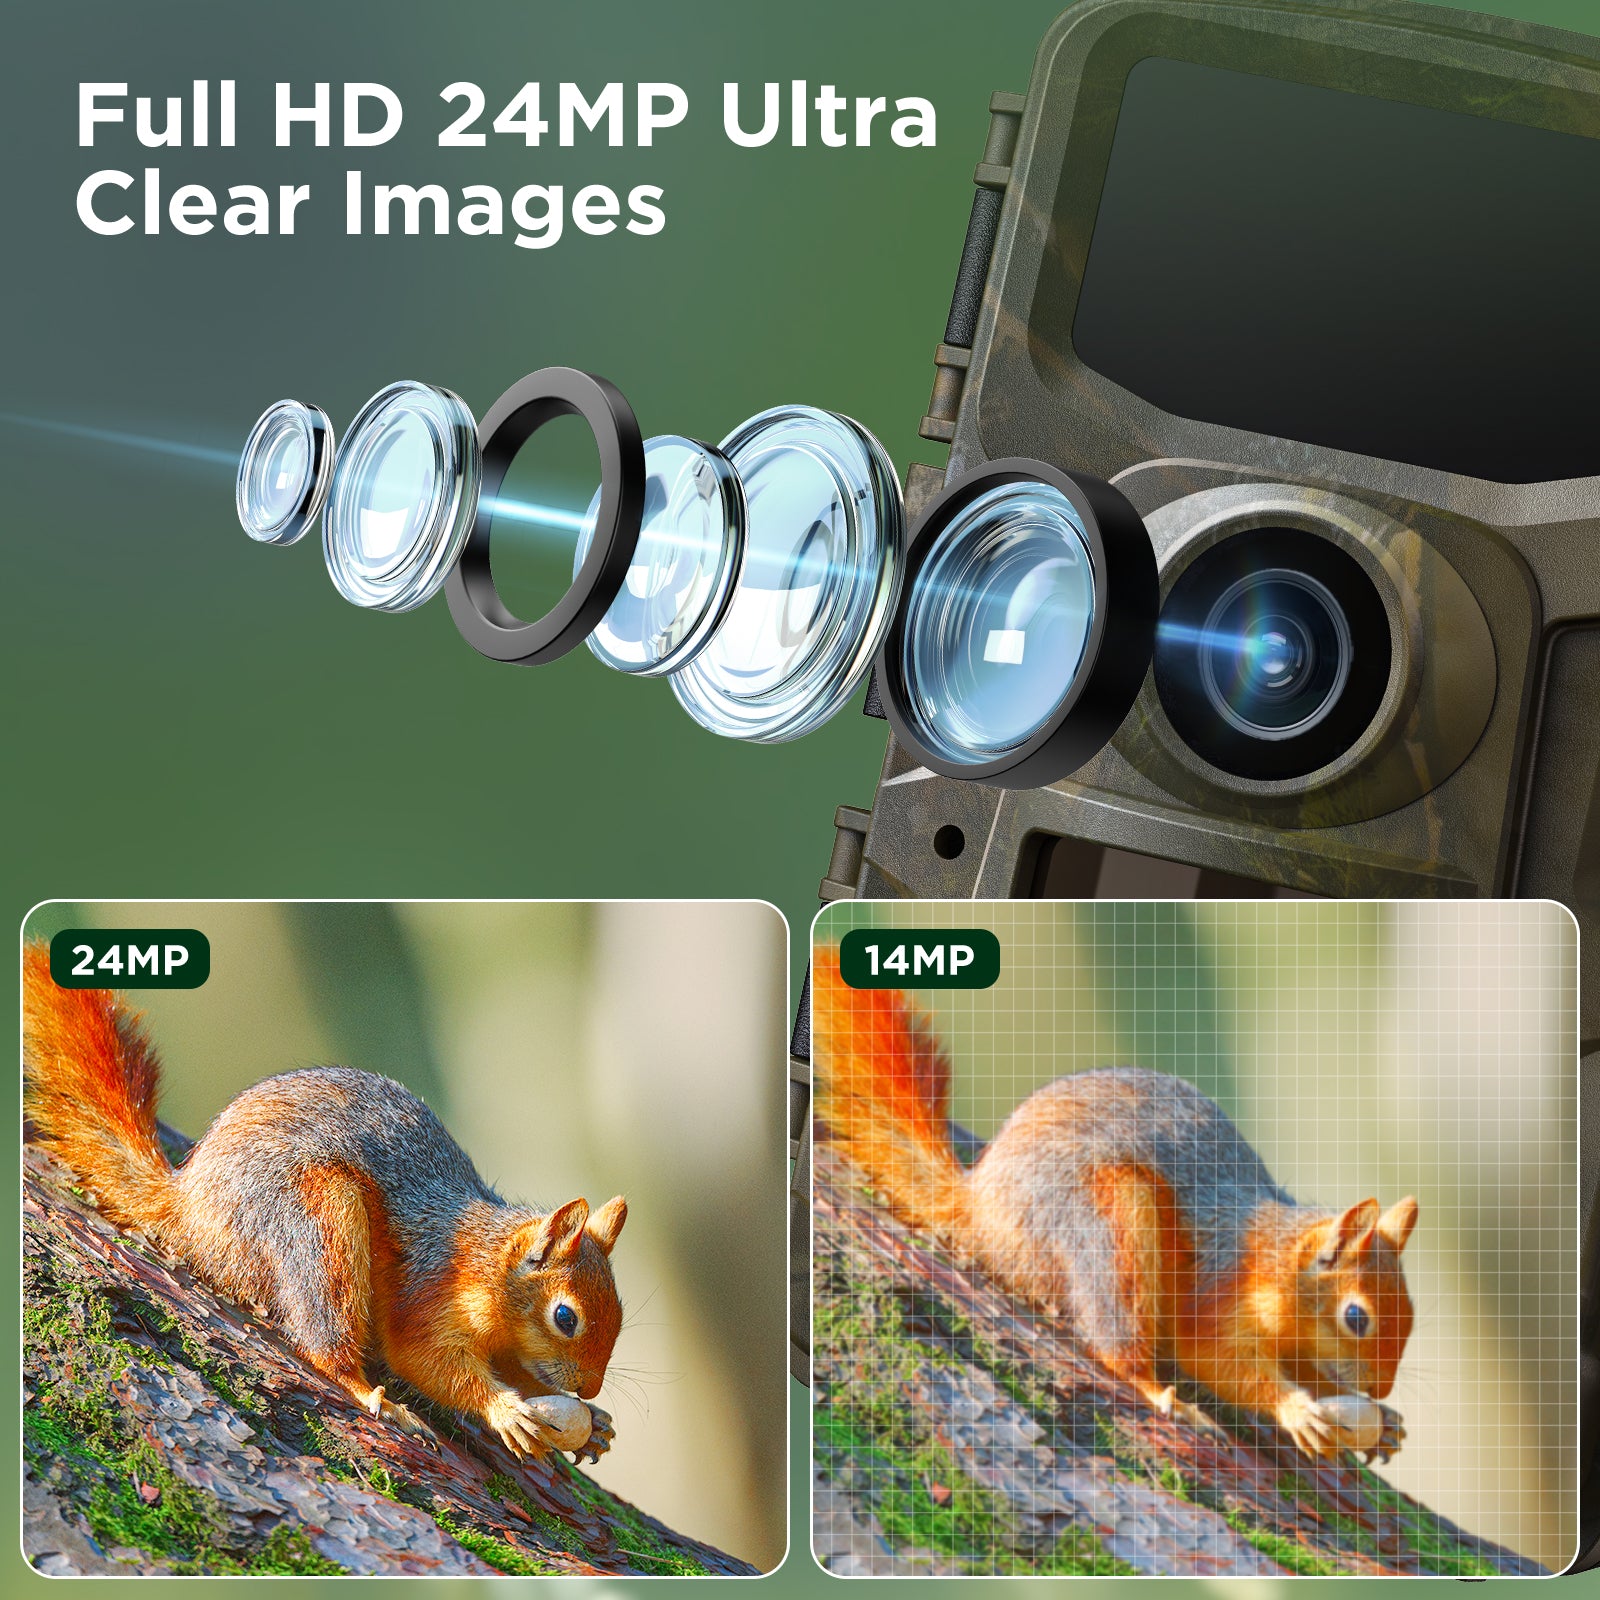 Trail Camera with 2.0''LCD Screen, Night Vision and 120° Wide Detect for Wildlife Monitor